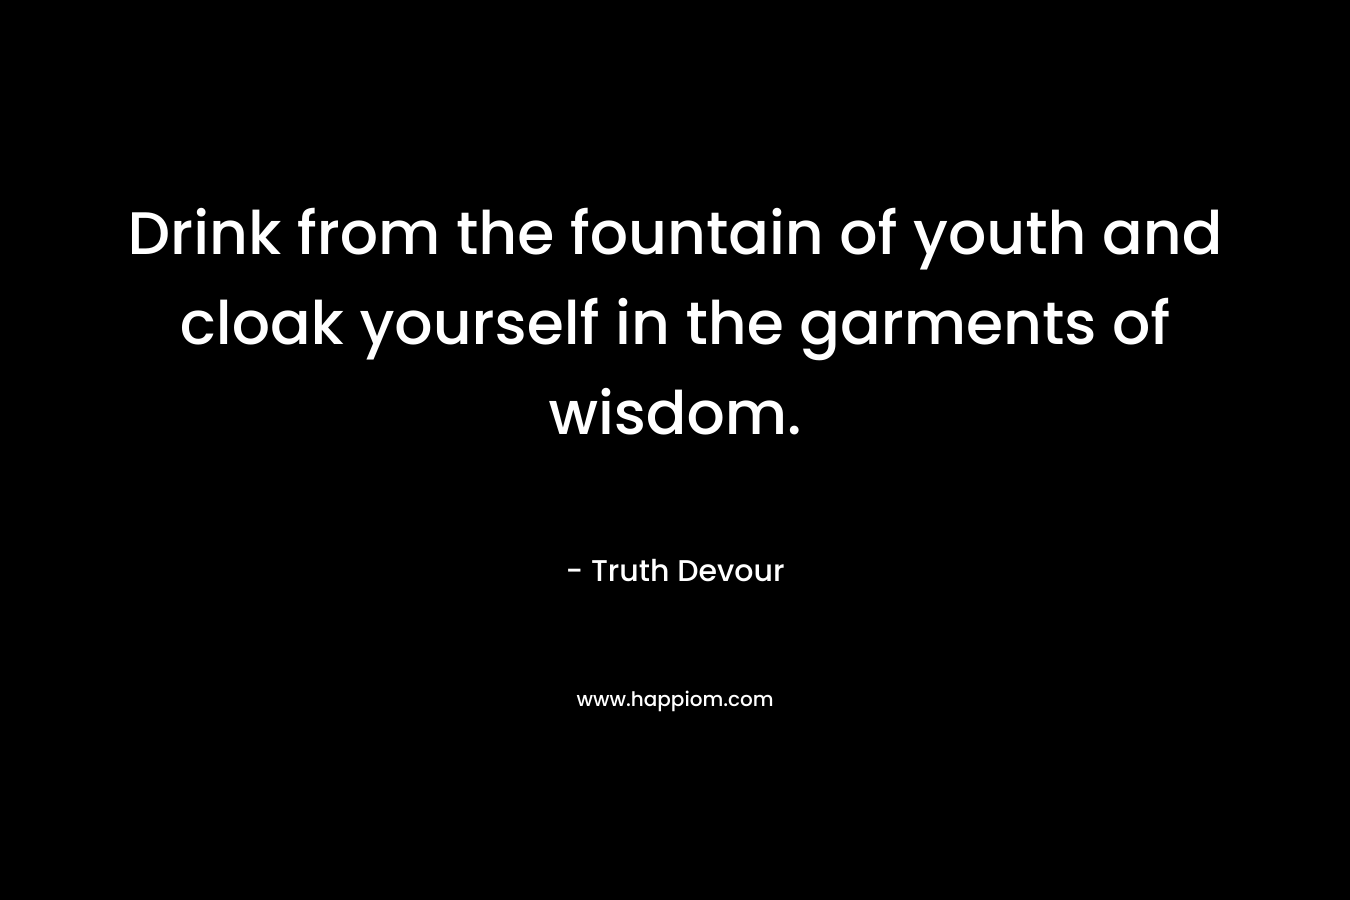 Drink from the fountain of youth and cloak yourself in the garments of wisdom.